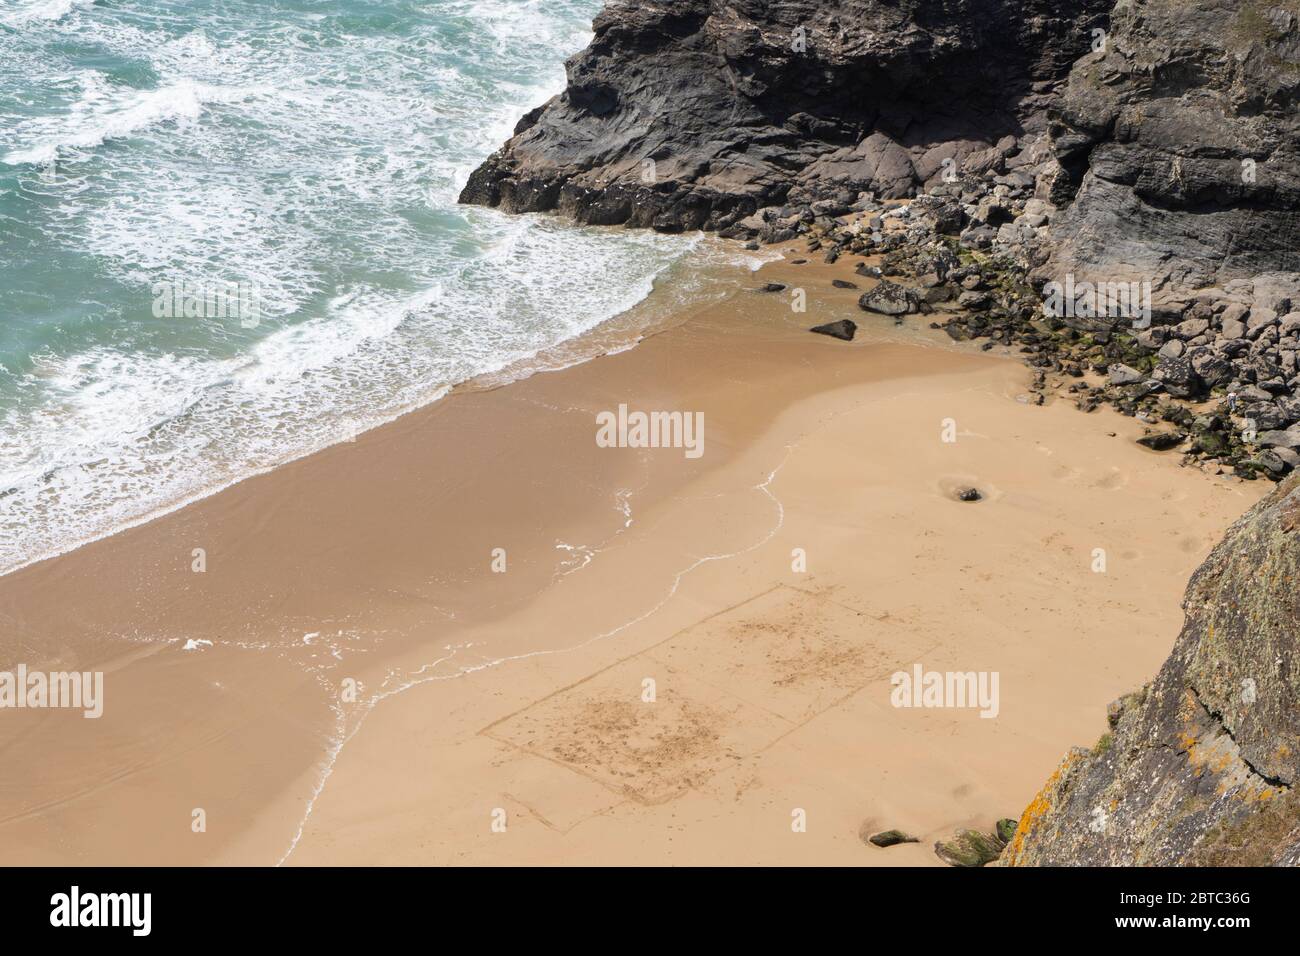 Beach football pitch at Bedruthan Steps during COVID-19 lockdown. Stock Photo